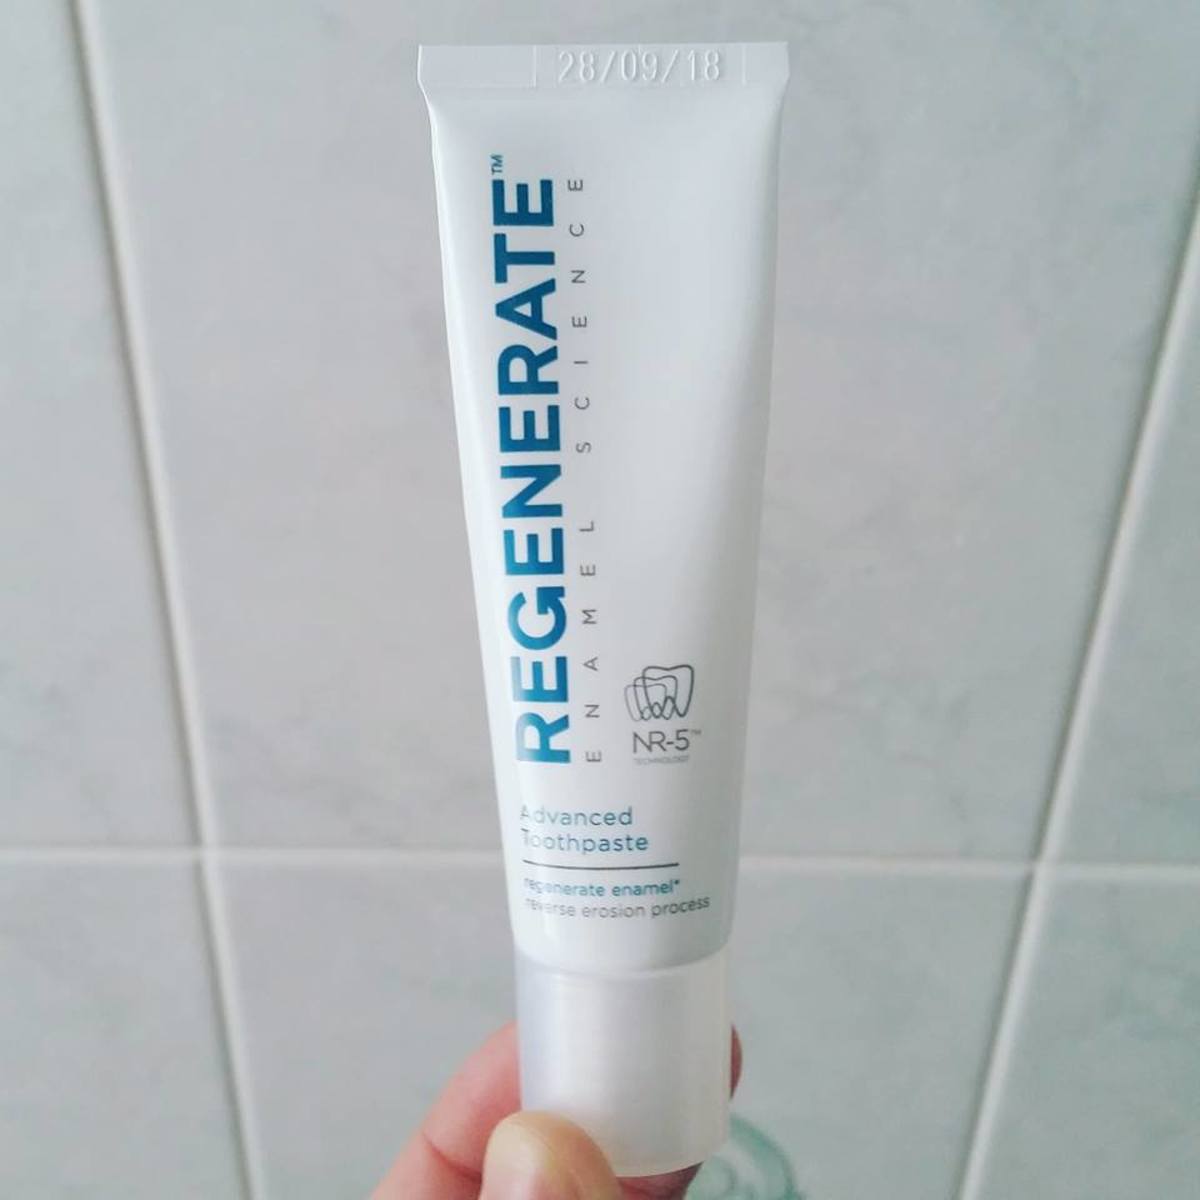 The tube of Regenerate Enamel Science Advanced Toothpaste that I used.